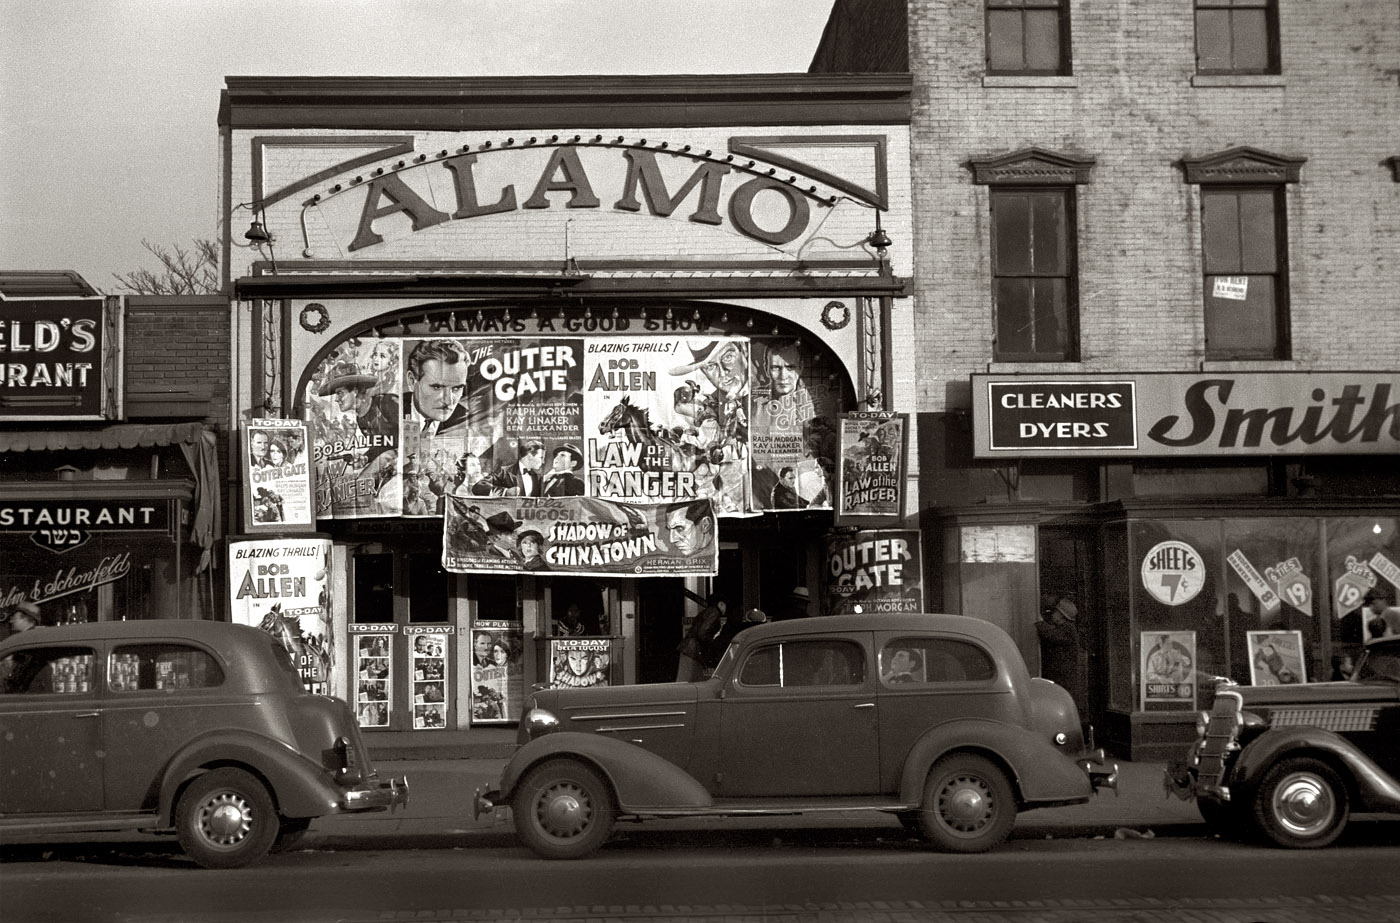 December 1937. The Alamo movie theater in Washington, D.C. View full size. 35mm nitrate negative by John Vachon for the Farm Security Administration.